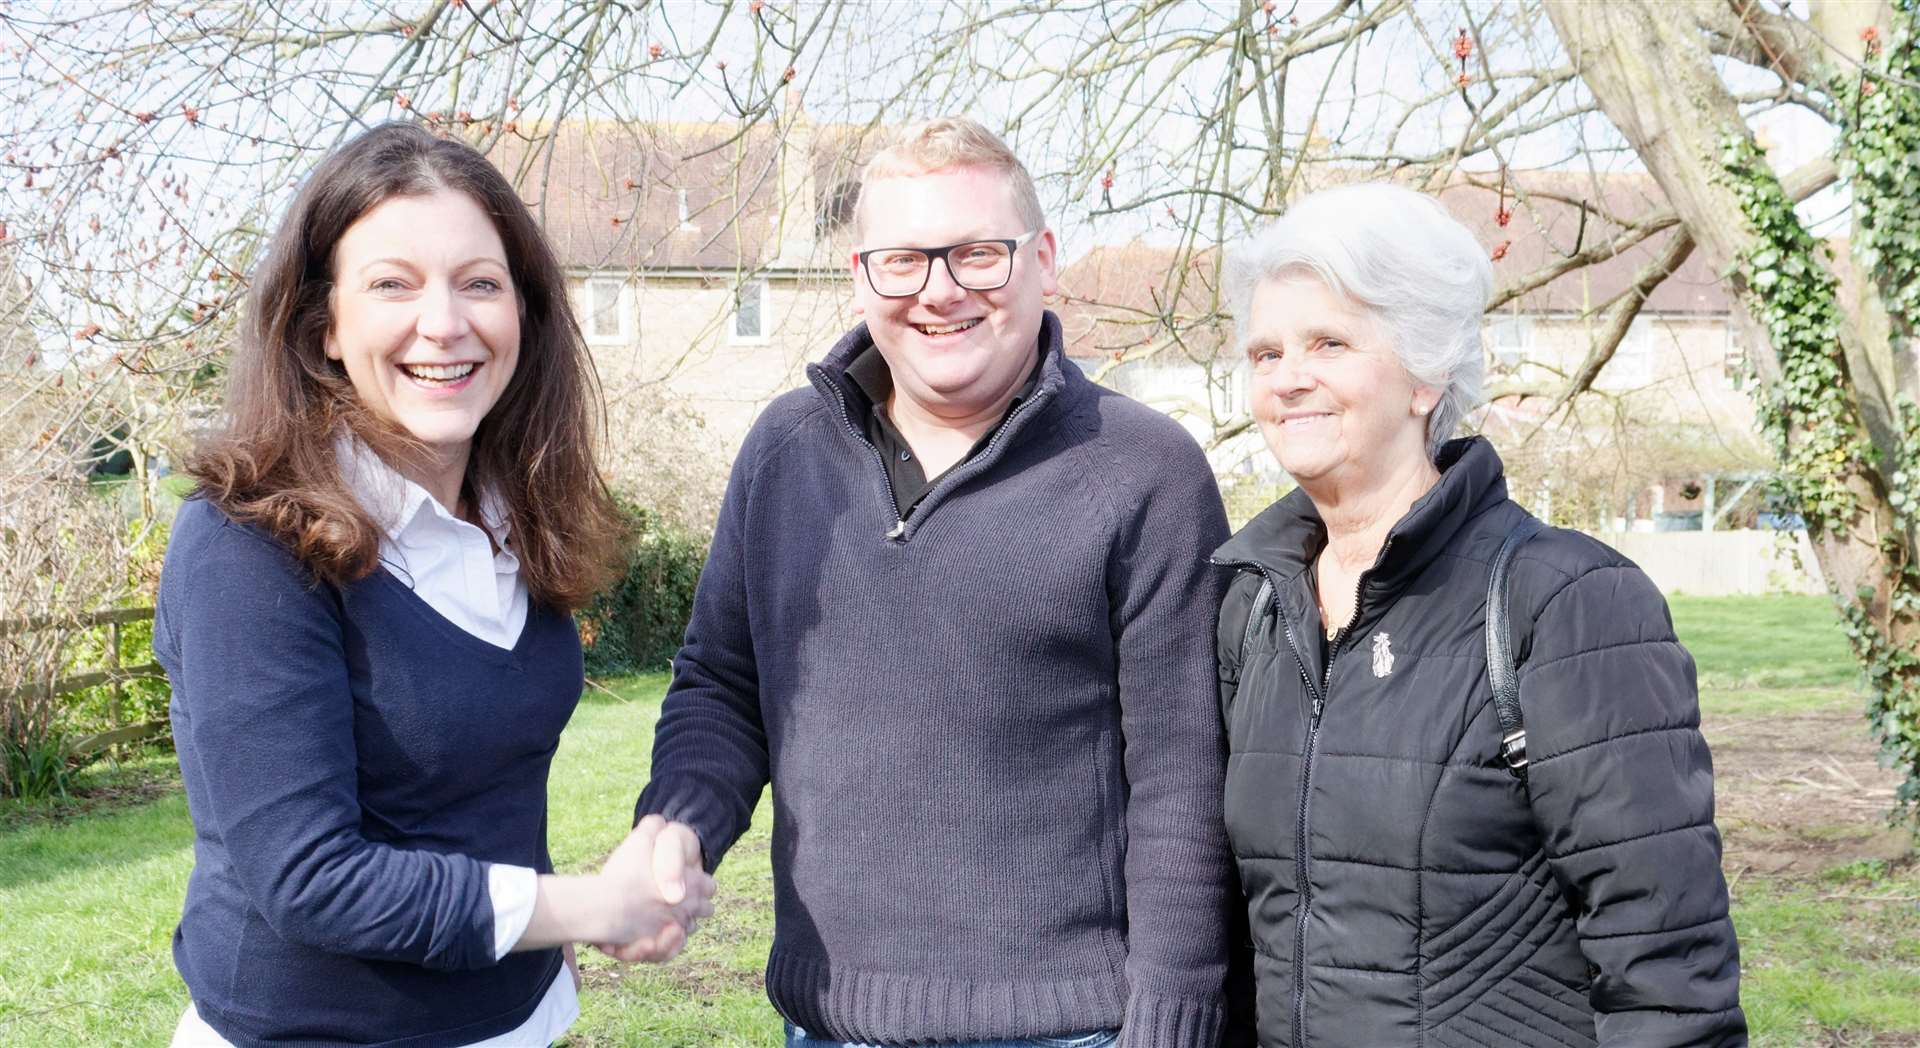 Former Sittingbourne and Sheppey Brexit Party parliamentary candidate Evie Martin, left, with Swale Lib Dem Group leader Cllr Ben J Martin and Lib Dem Faversham Town Council Mayor Cllr Alison Reynolds